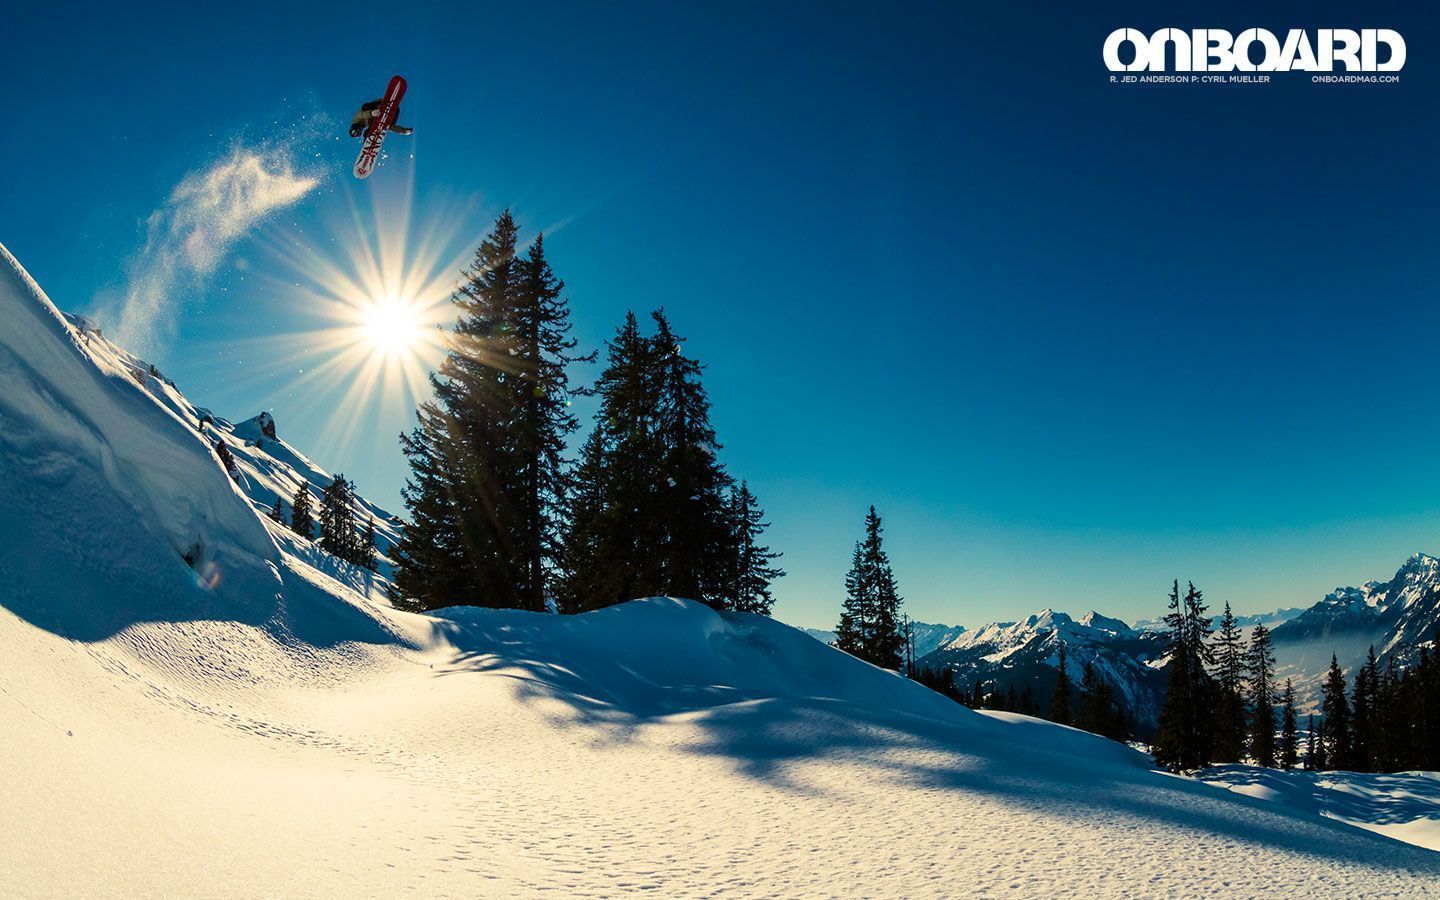 Top Snowboard Wallpapers of 2014 - Intro Top 10 Snowboard